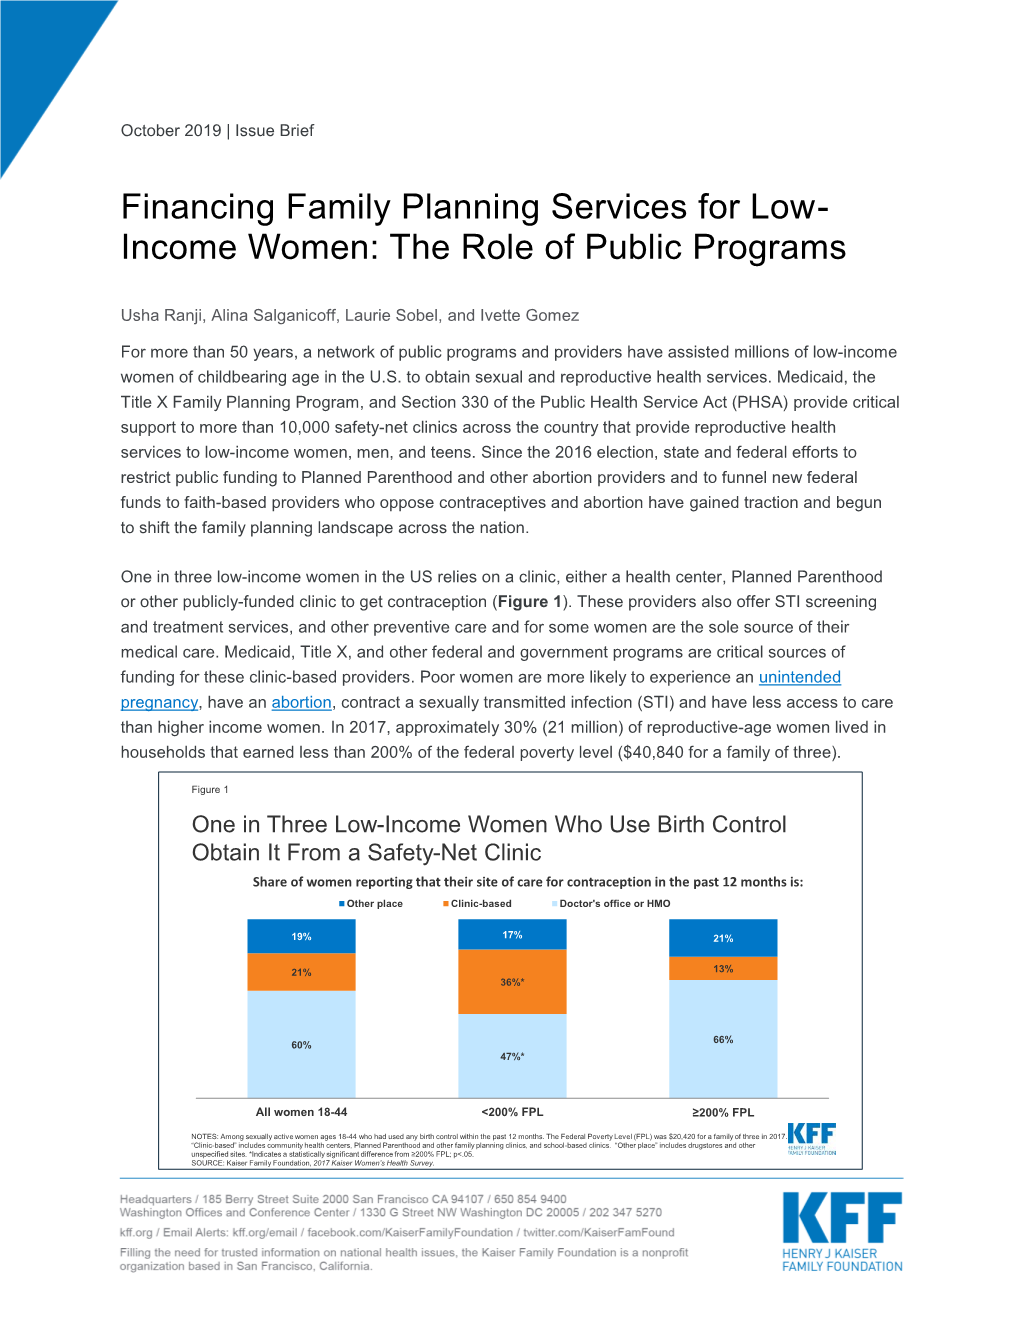 Financing Family Planning Services for Low-Income Women: the Role of Public Programs 2